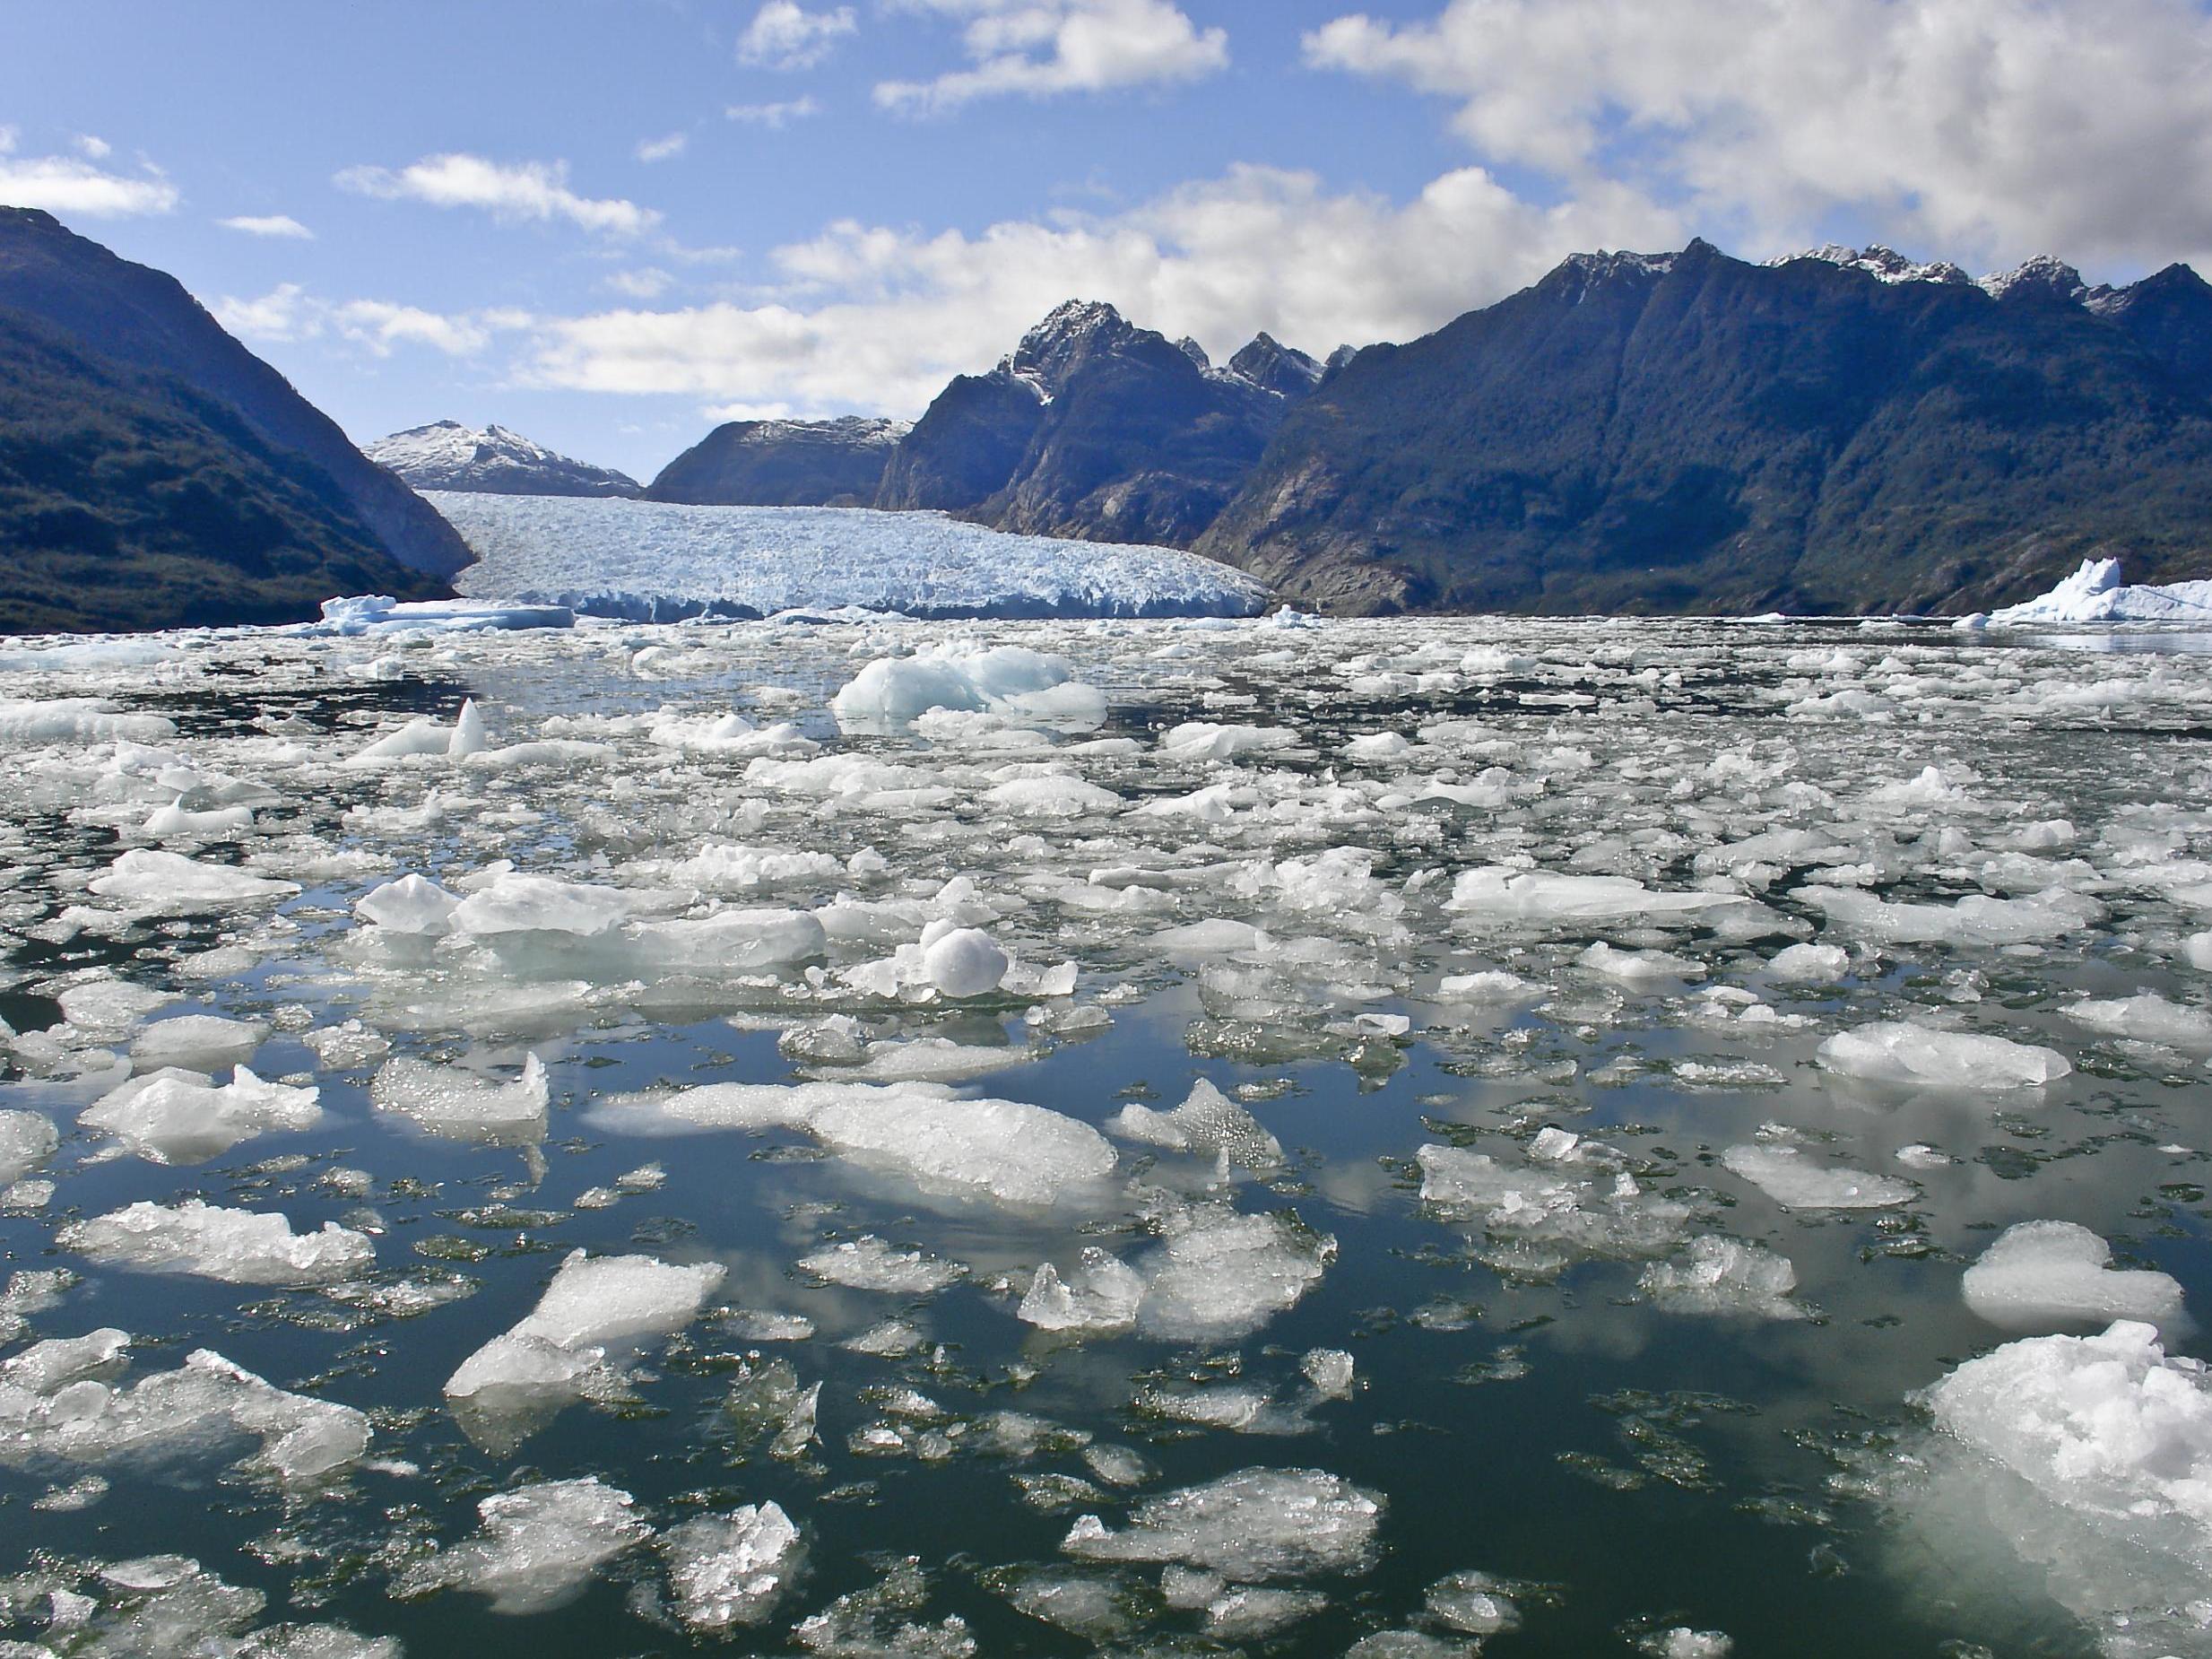 Warming seas are causing glaciers to calve ice into the oceans more rapidly, speeding up melt rates